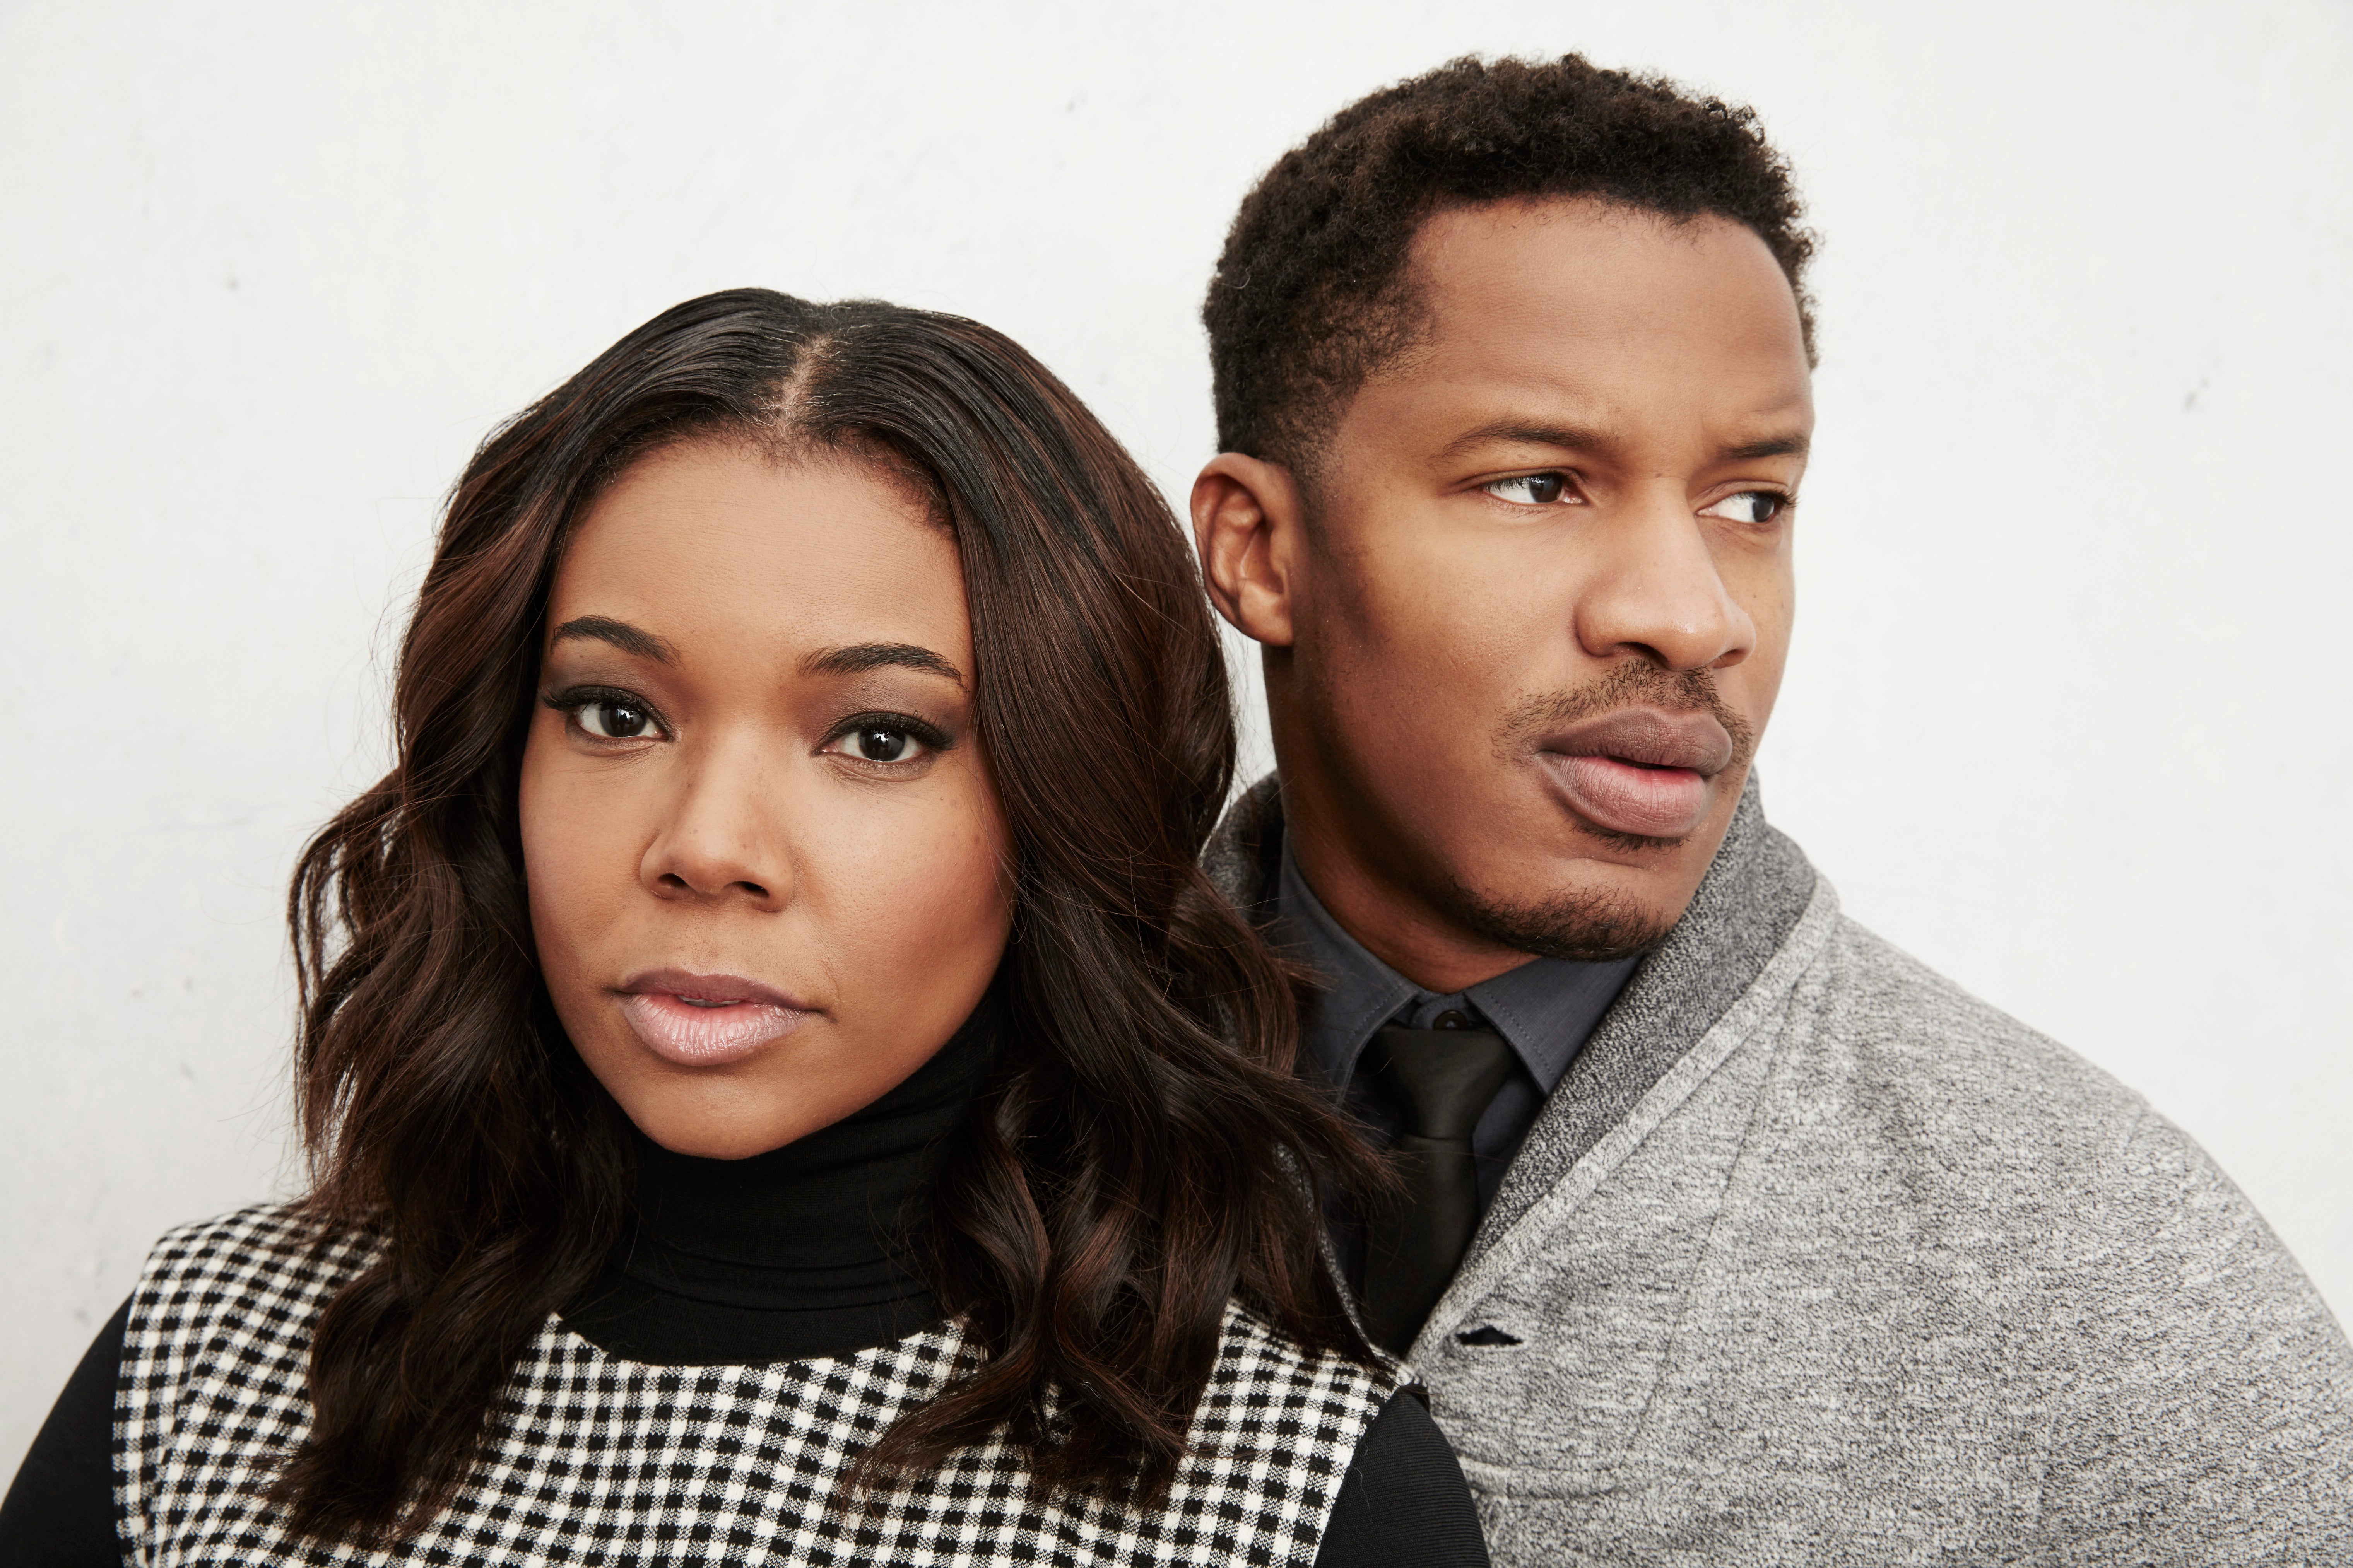 Gabrielle Union On Nate Parker: "I Cannot Take Rape Allegations Lightly"
